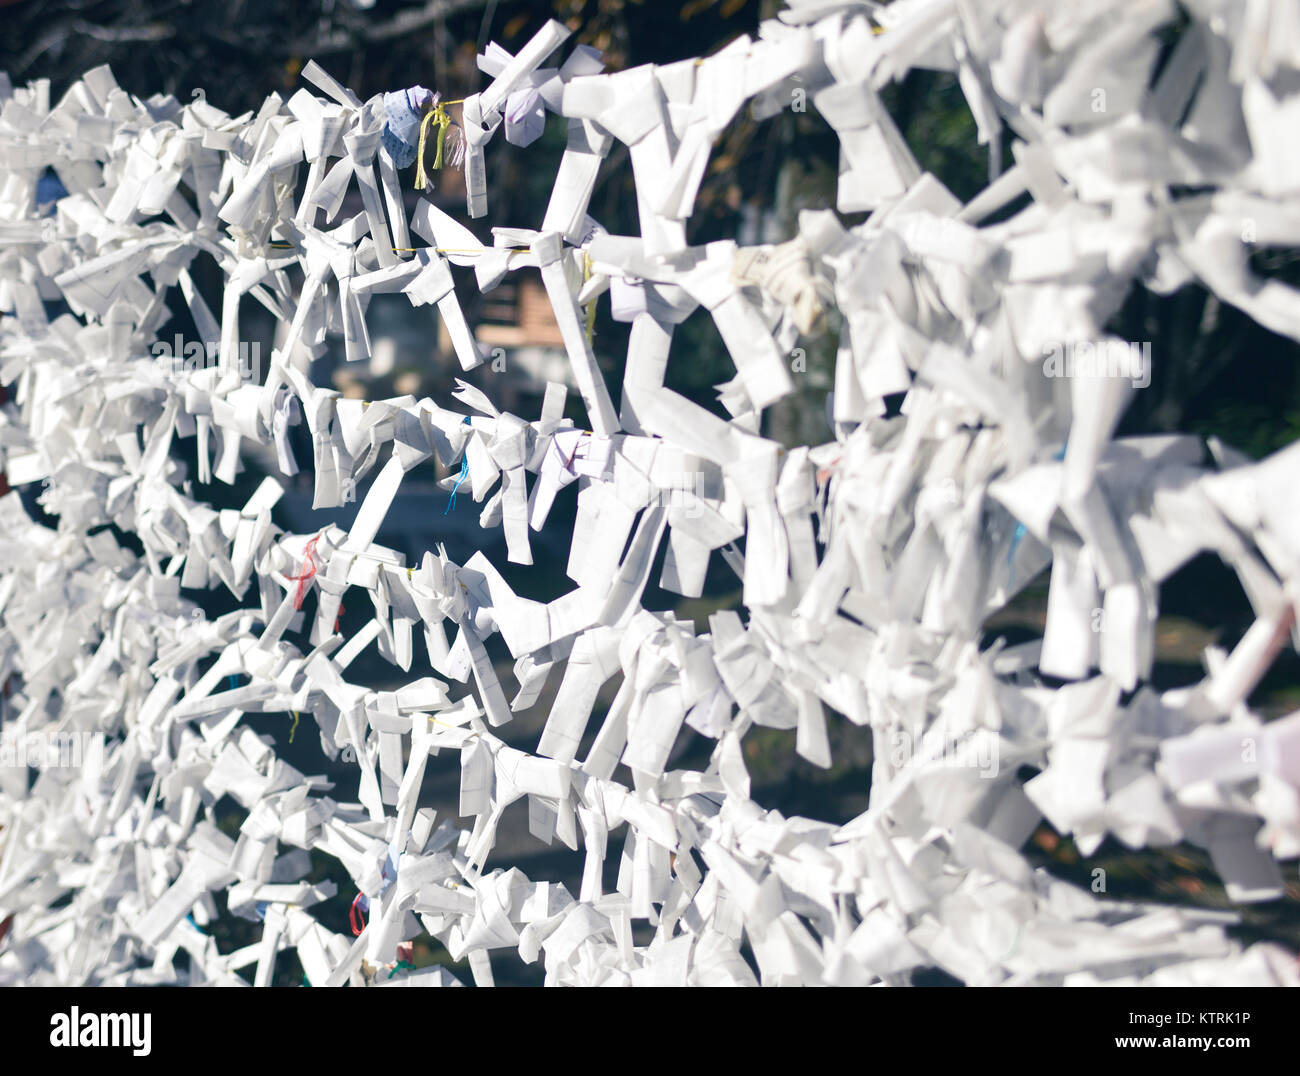 O-mikuji strips of paper with written fortune tied at Yasui Konpiragu Shinto Shrine in Gion district, Kyoto, Japan 2017. Stock Photo